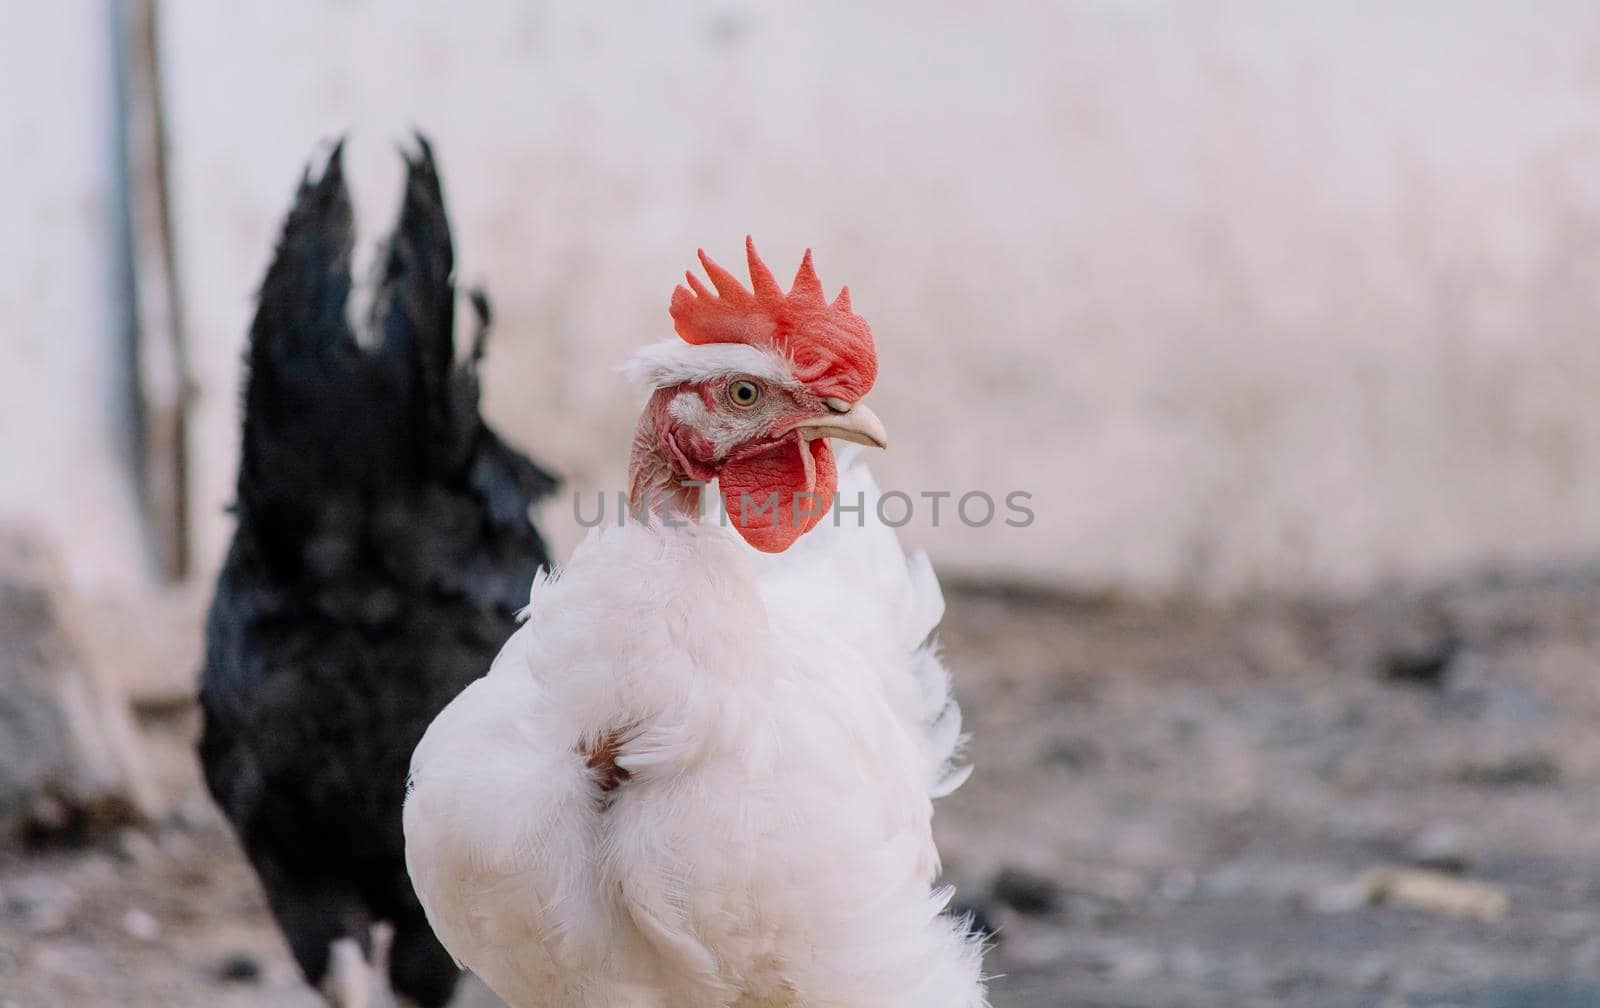 Portrait of a piroco rooster, close up of an Indian rooster, portrait of a piroco rooster with a crest, concept of domestic animals. by isaiphoto